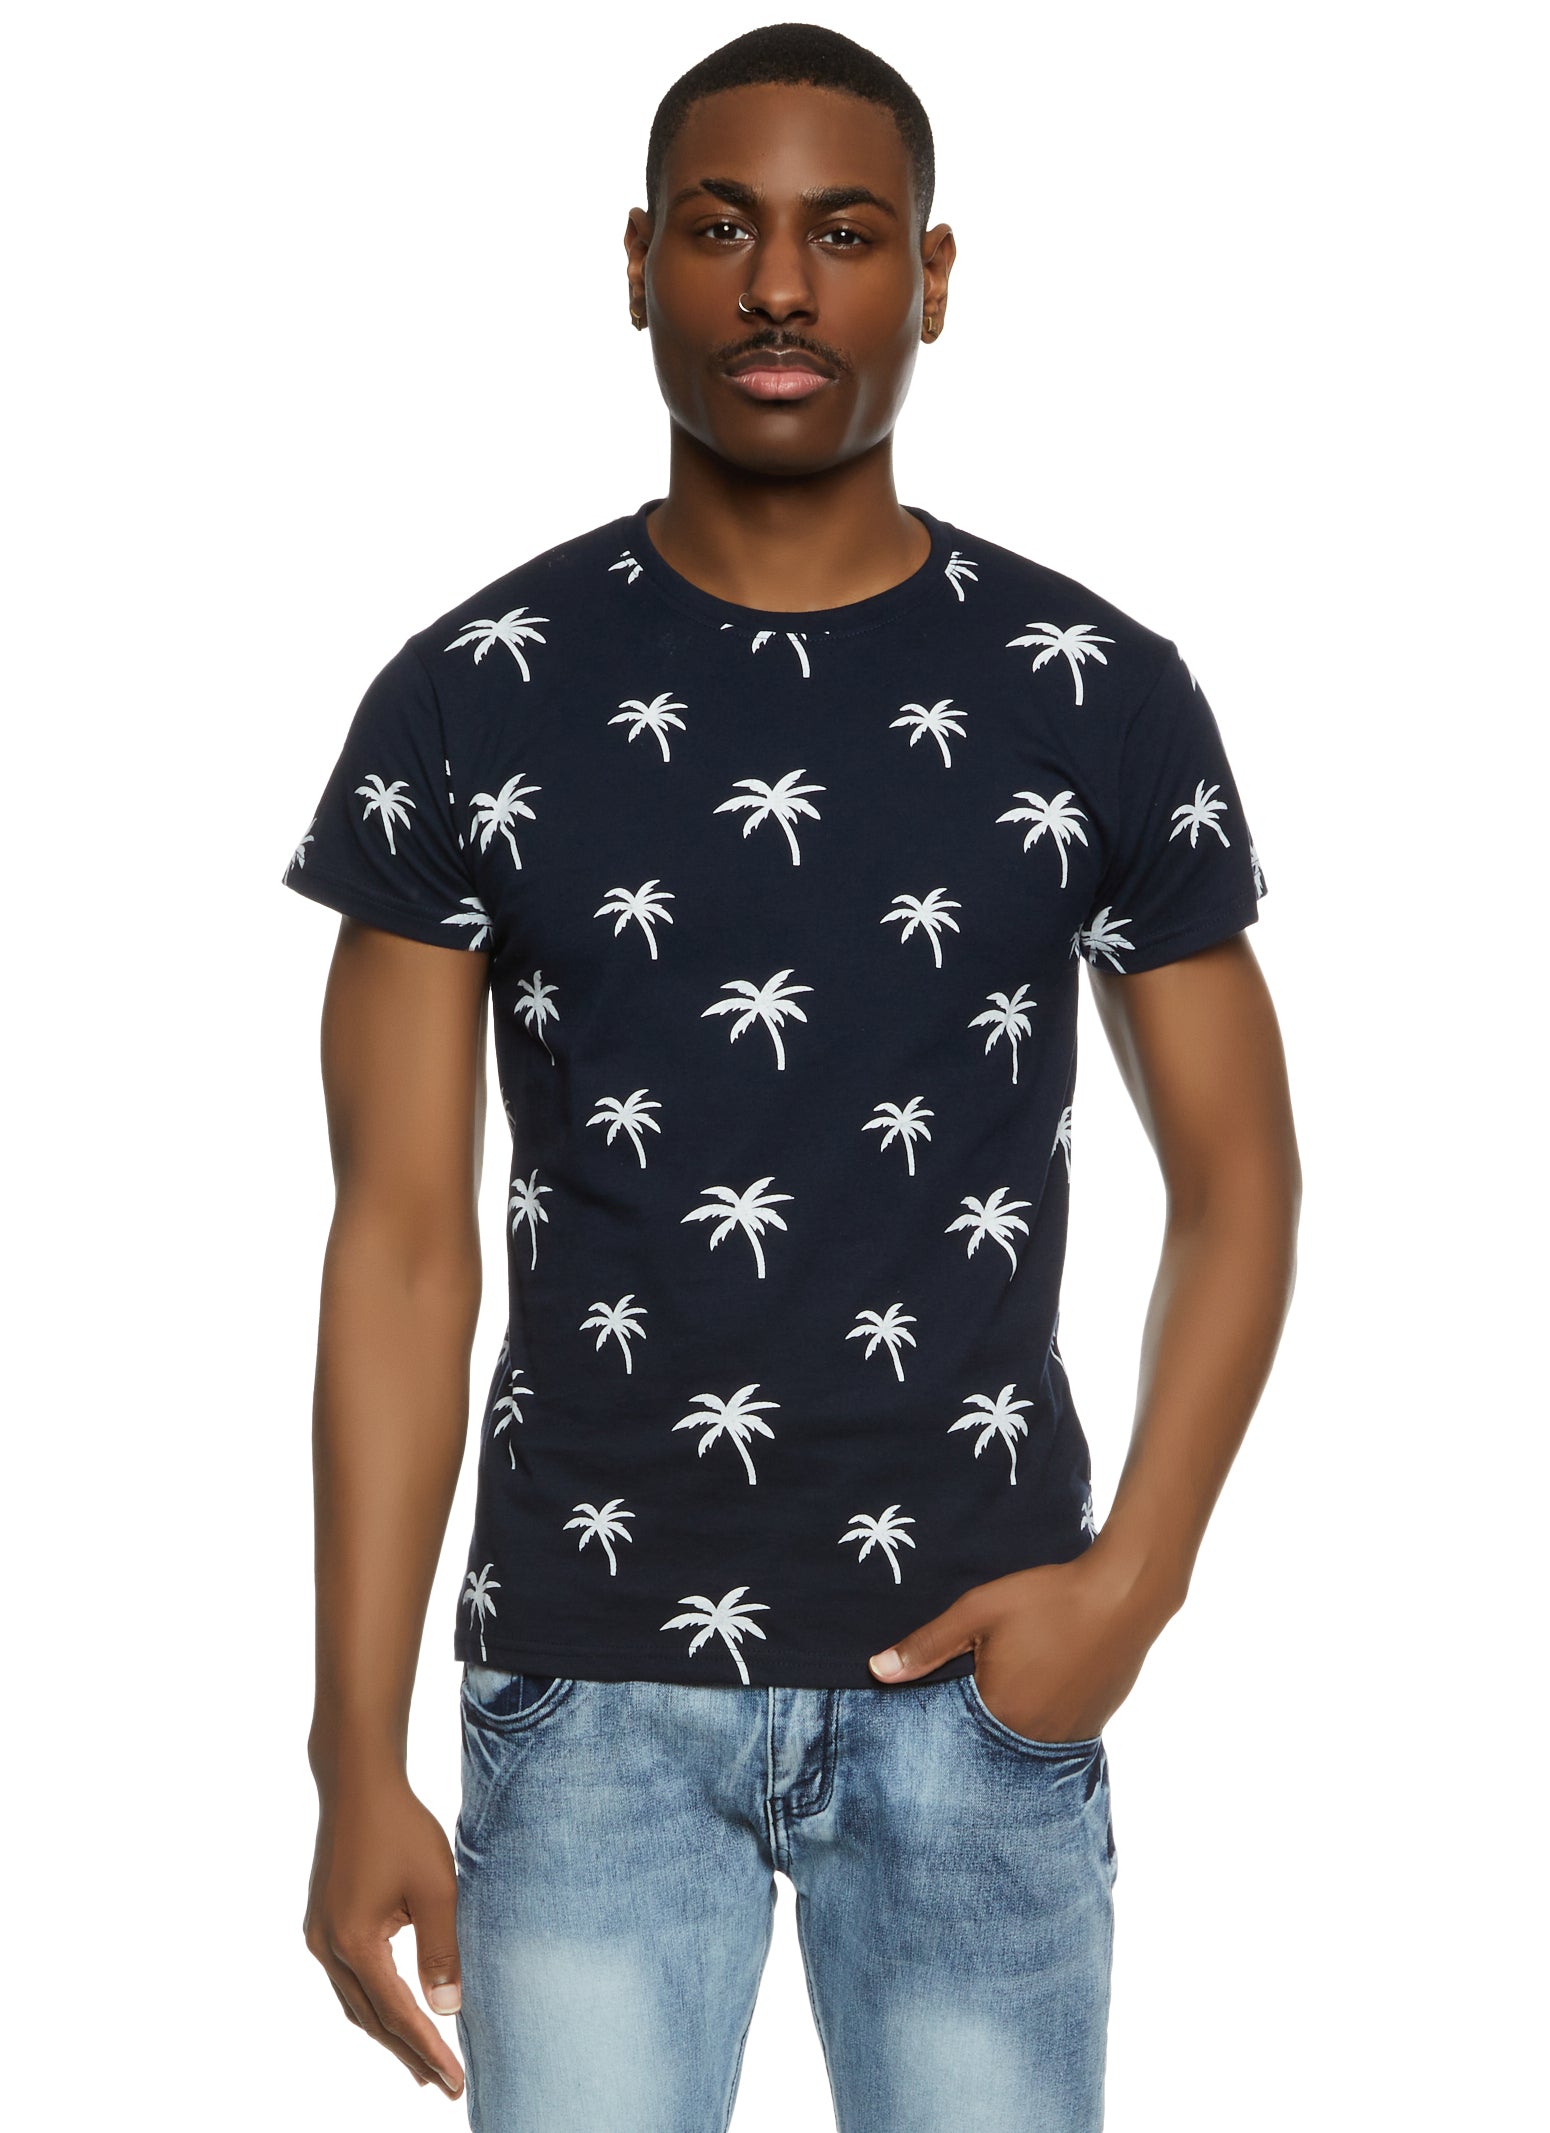 Womens Mens Palm Tree Printed Graphic Tee, Blue, Size M